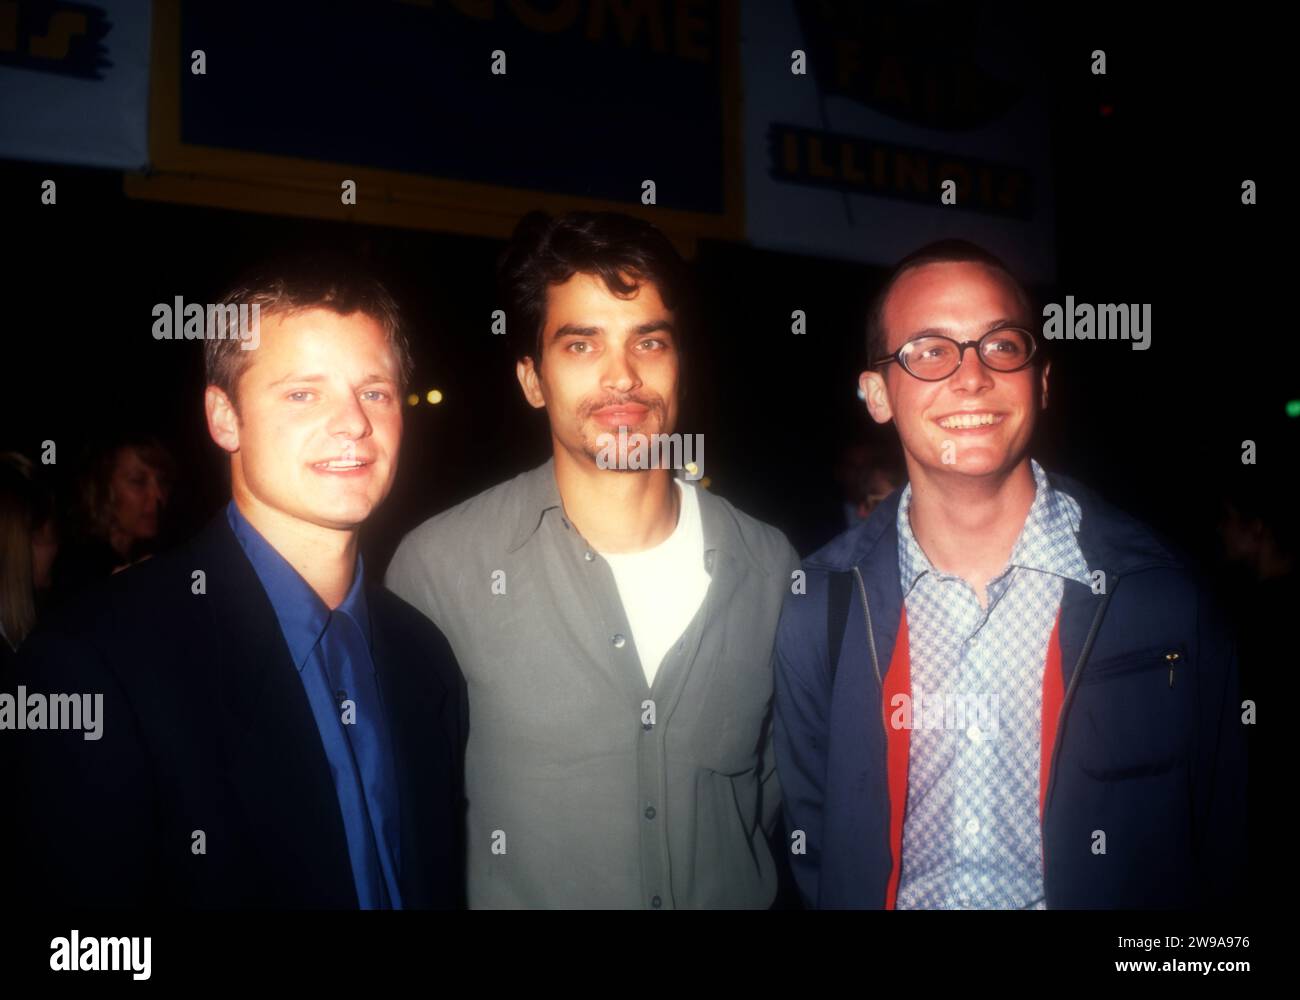 Century City, California, USA 30th September 1996 (L-R) Actor Steve Zahn, Actor Johnathon Schaech and Actor Ethan Embry attend 20th Century StudioÕs ÔThat Thing You DoÕ Premiere at Century City Cineplex Odeon Theaters on September 30, 1996 in Century City, California, USA. Photo by Barry King/Alamy Stock Photo Stock Photo